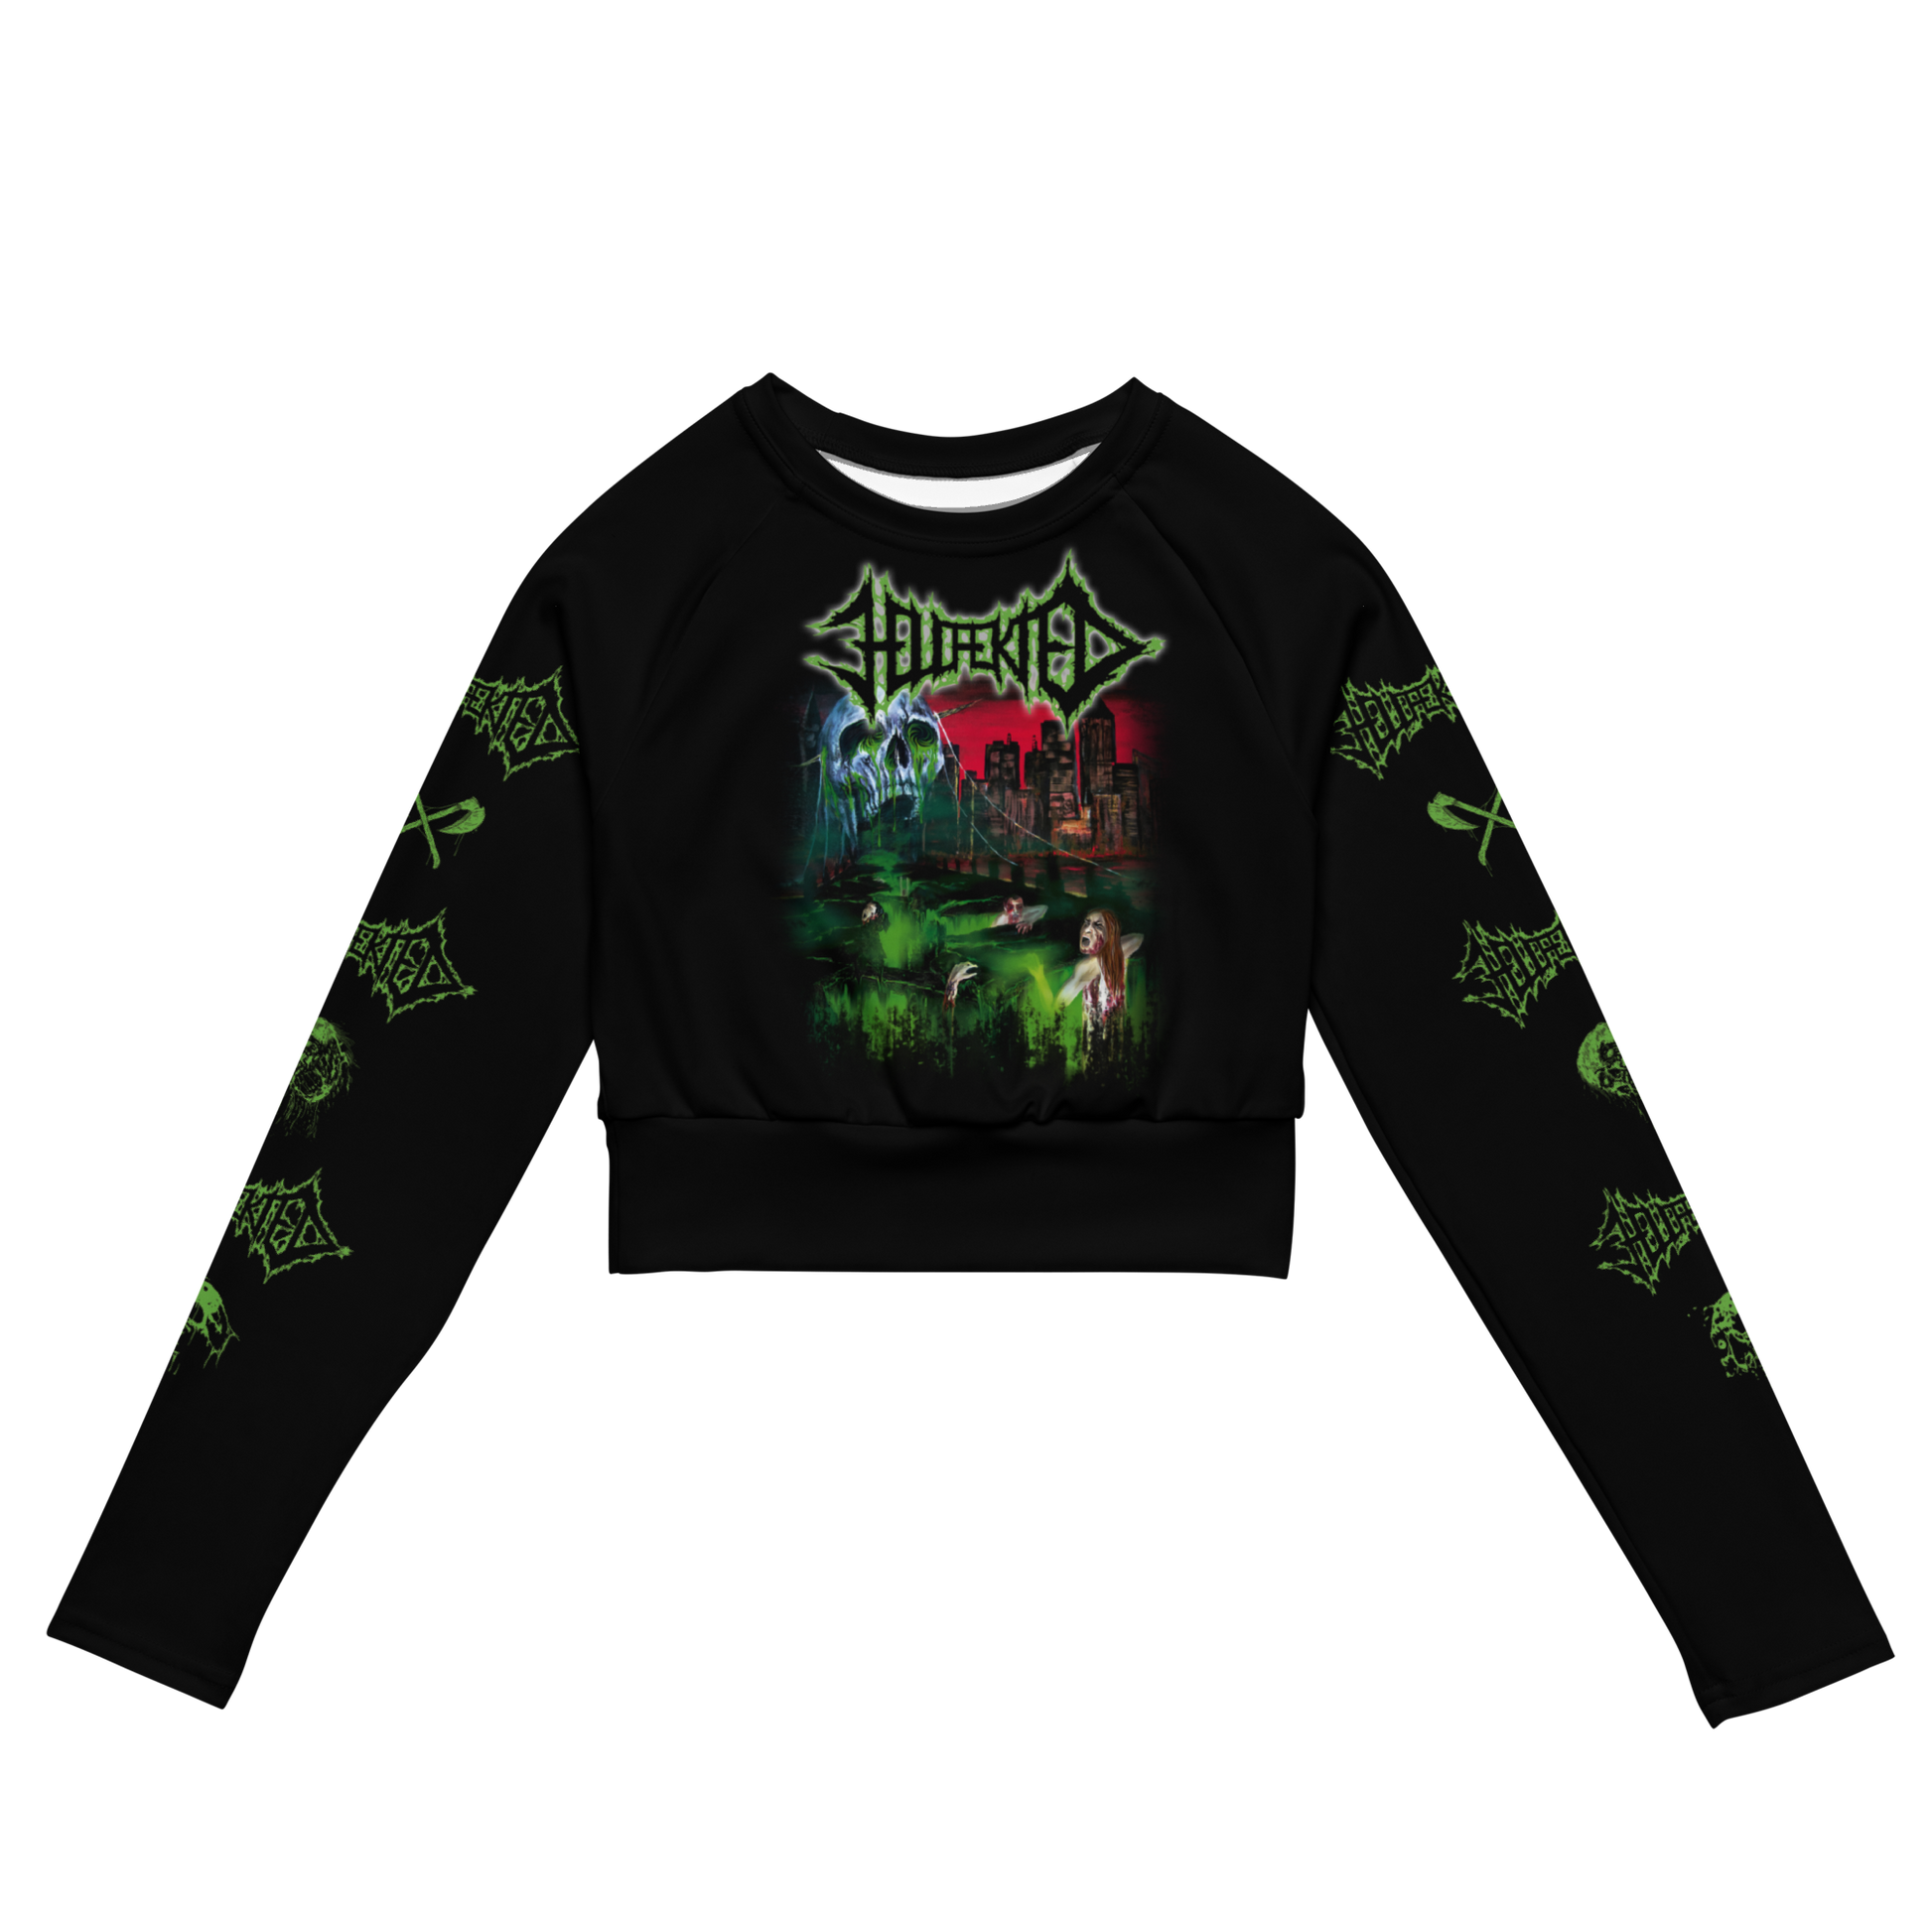 Hellfekted Woe to the Kingdom of Blood official long sleeve crop top by Metal Mistress 